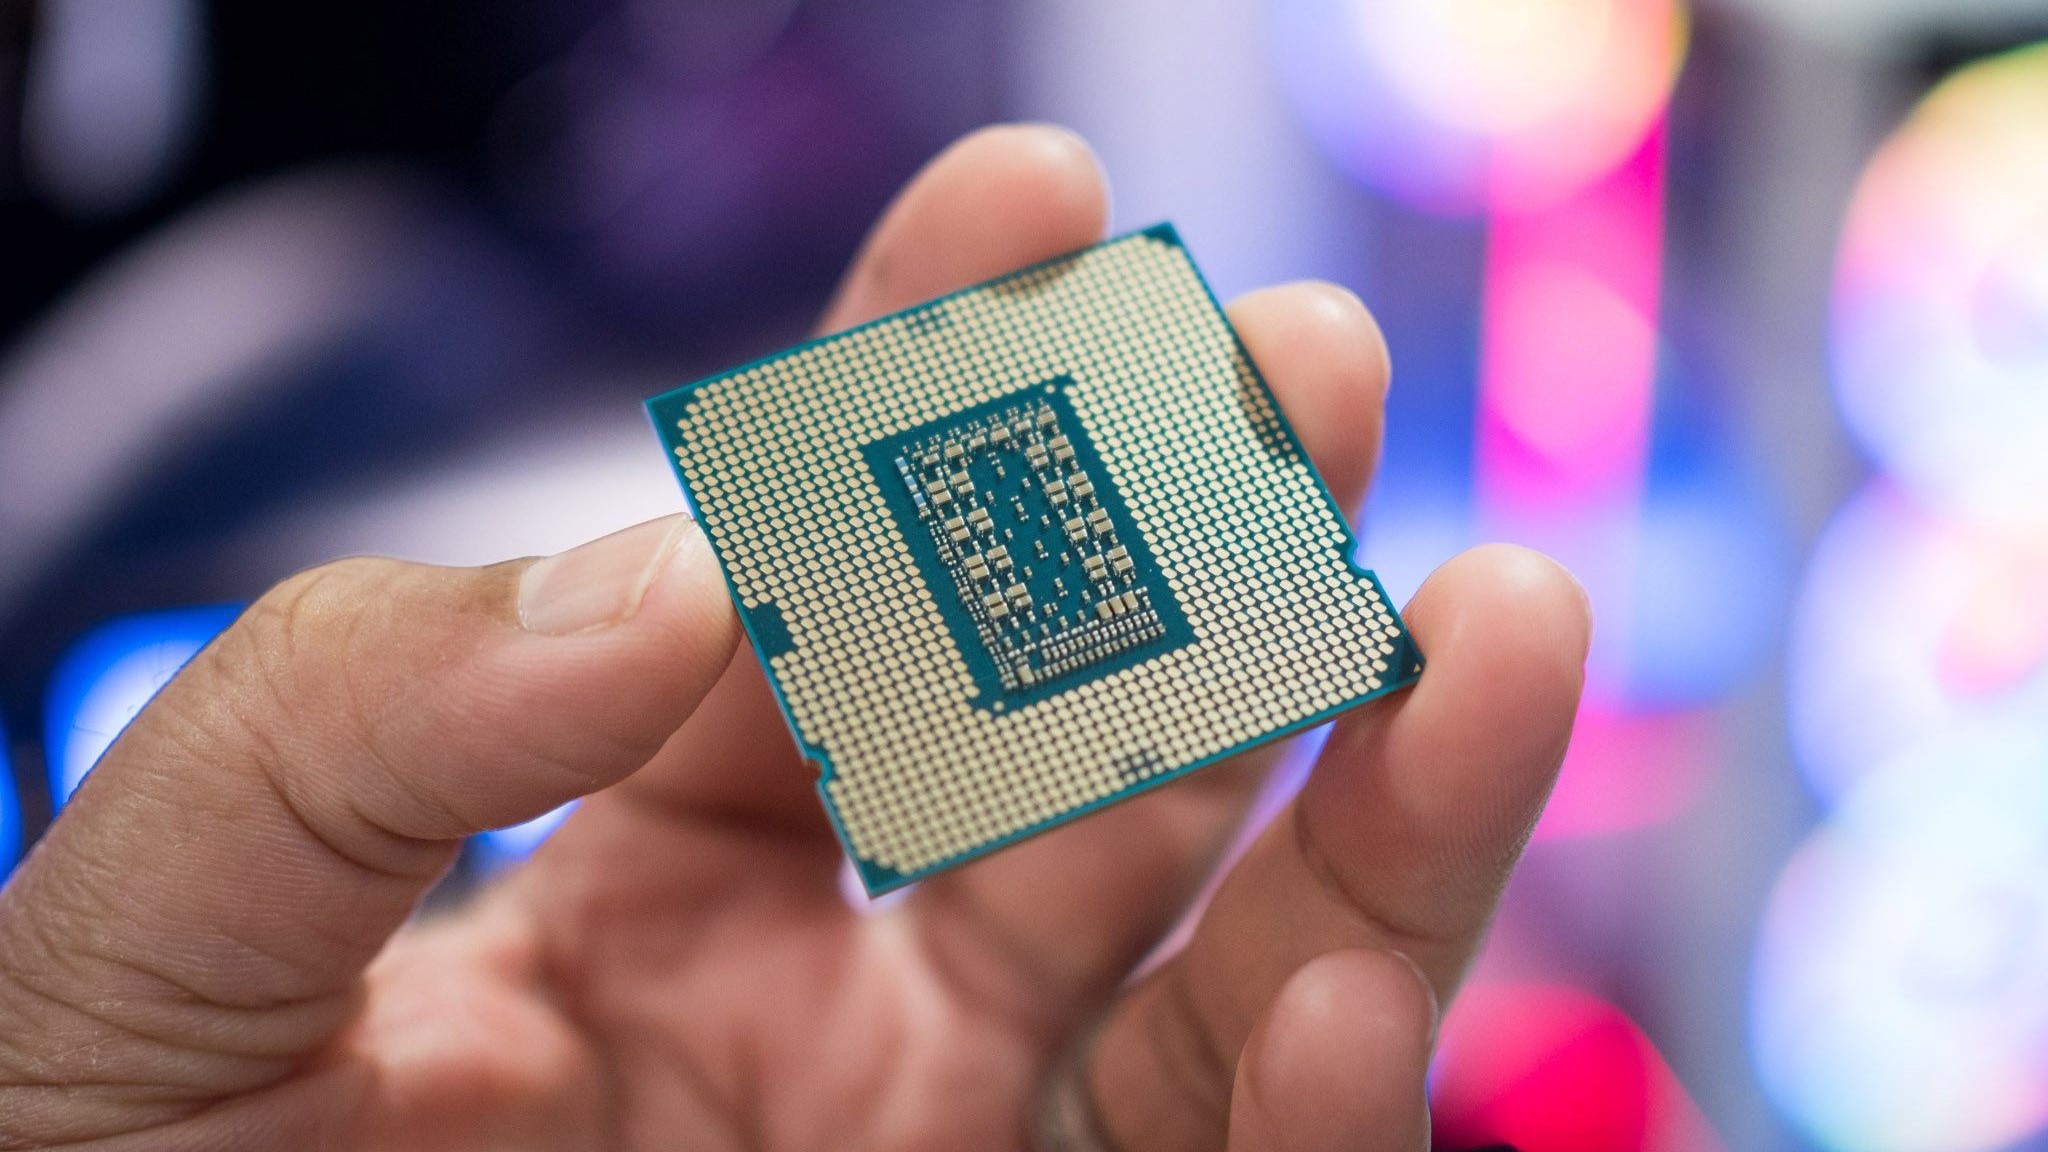 Benchmark Database Reveals Intel Arrow Lake and Lunar Lake CPUs, Focusing on Graphics Details